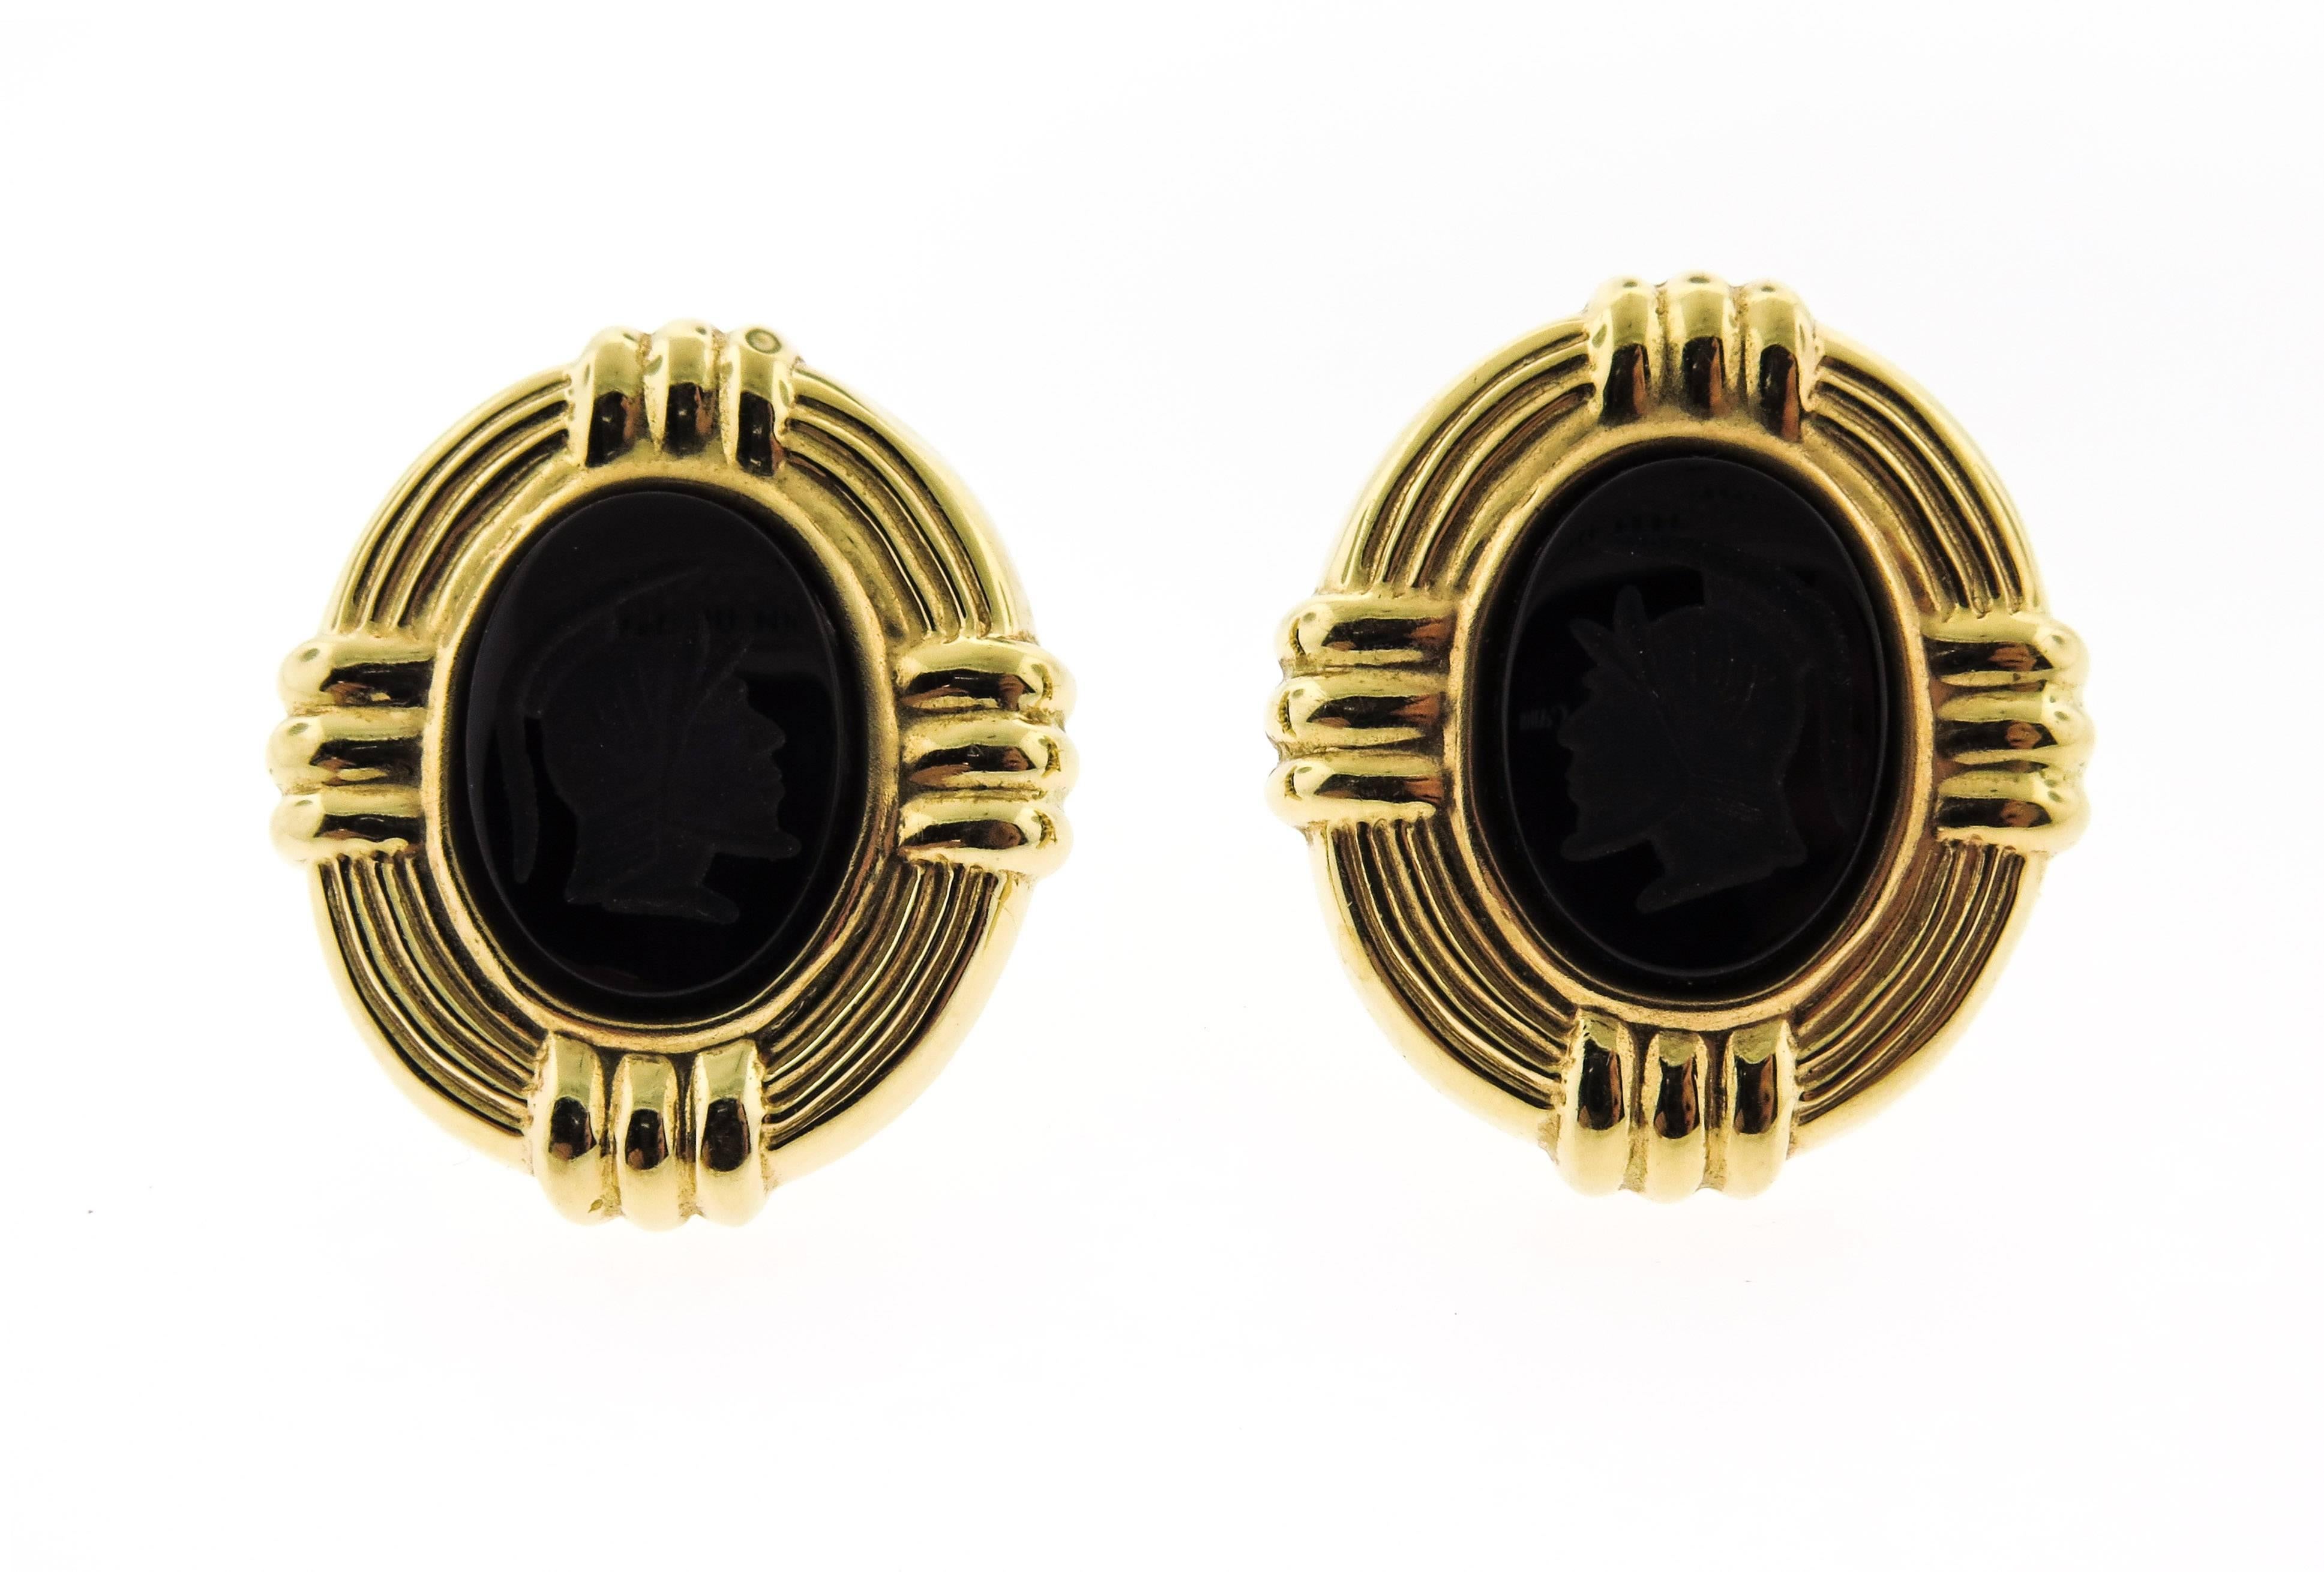 These unique earrings have a nice oval shape, each of which features a 13mm x 17.8mm genuine onyx stone. The onyx features a polished surface and has been carved in an intaglio style, depicting the bust of an ancient soldier wearing a helmet. The